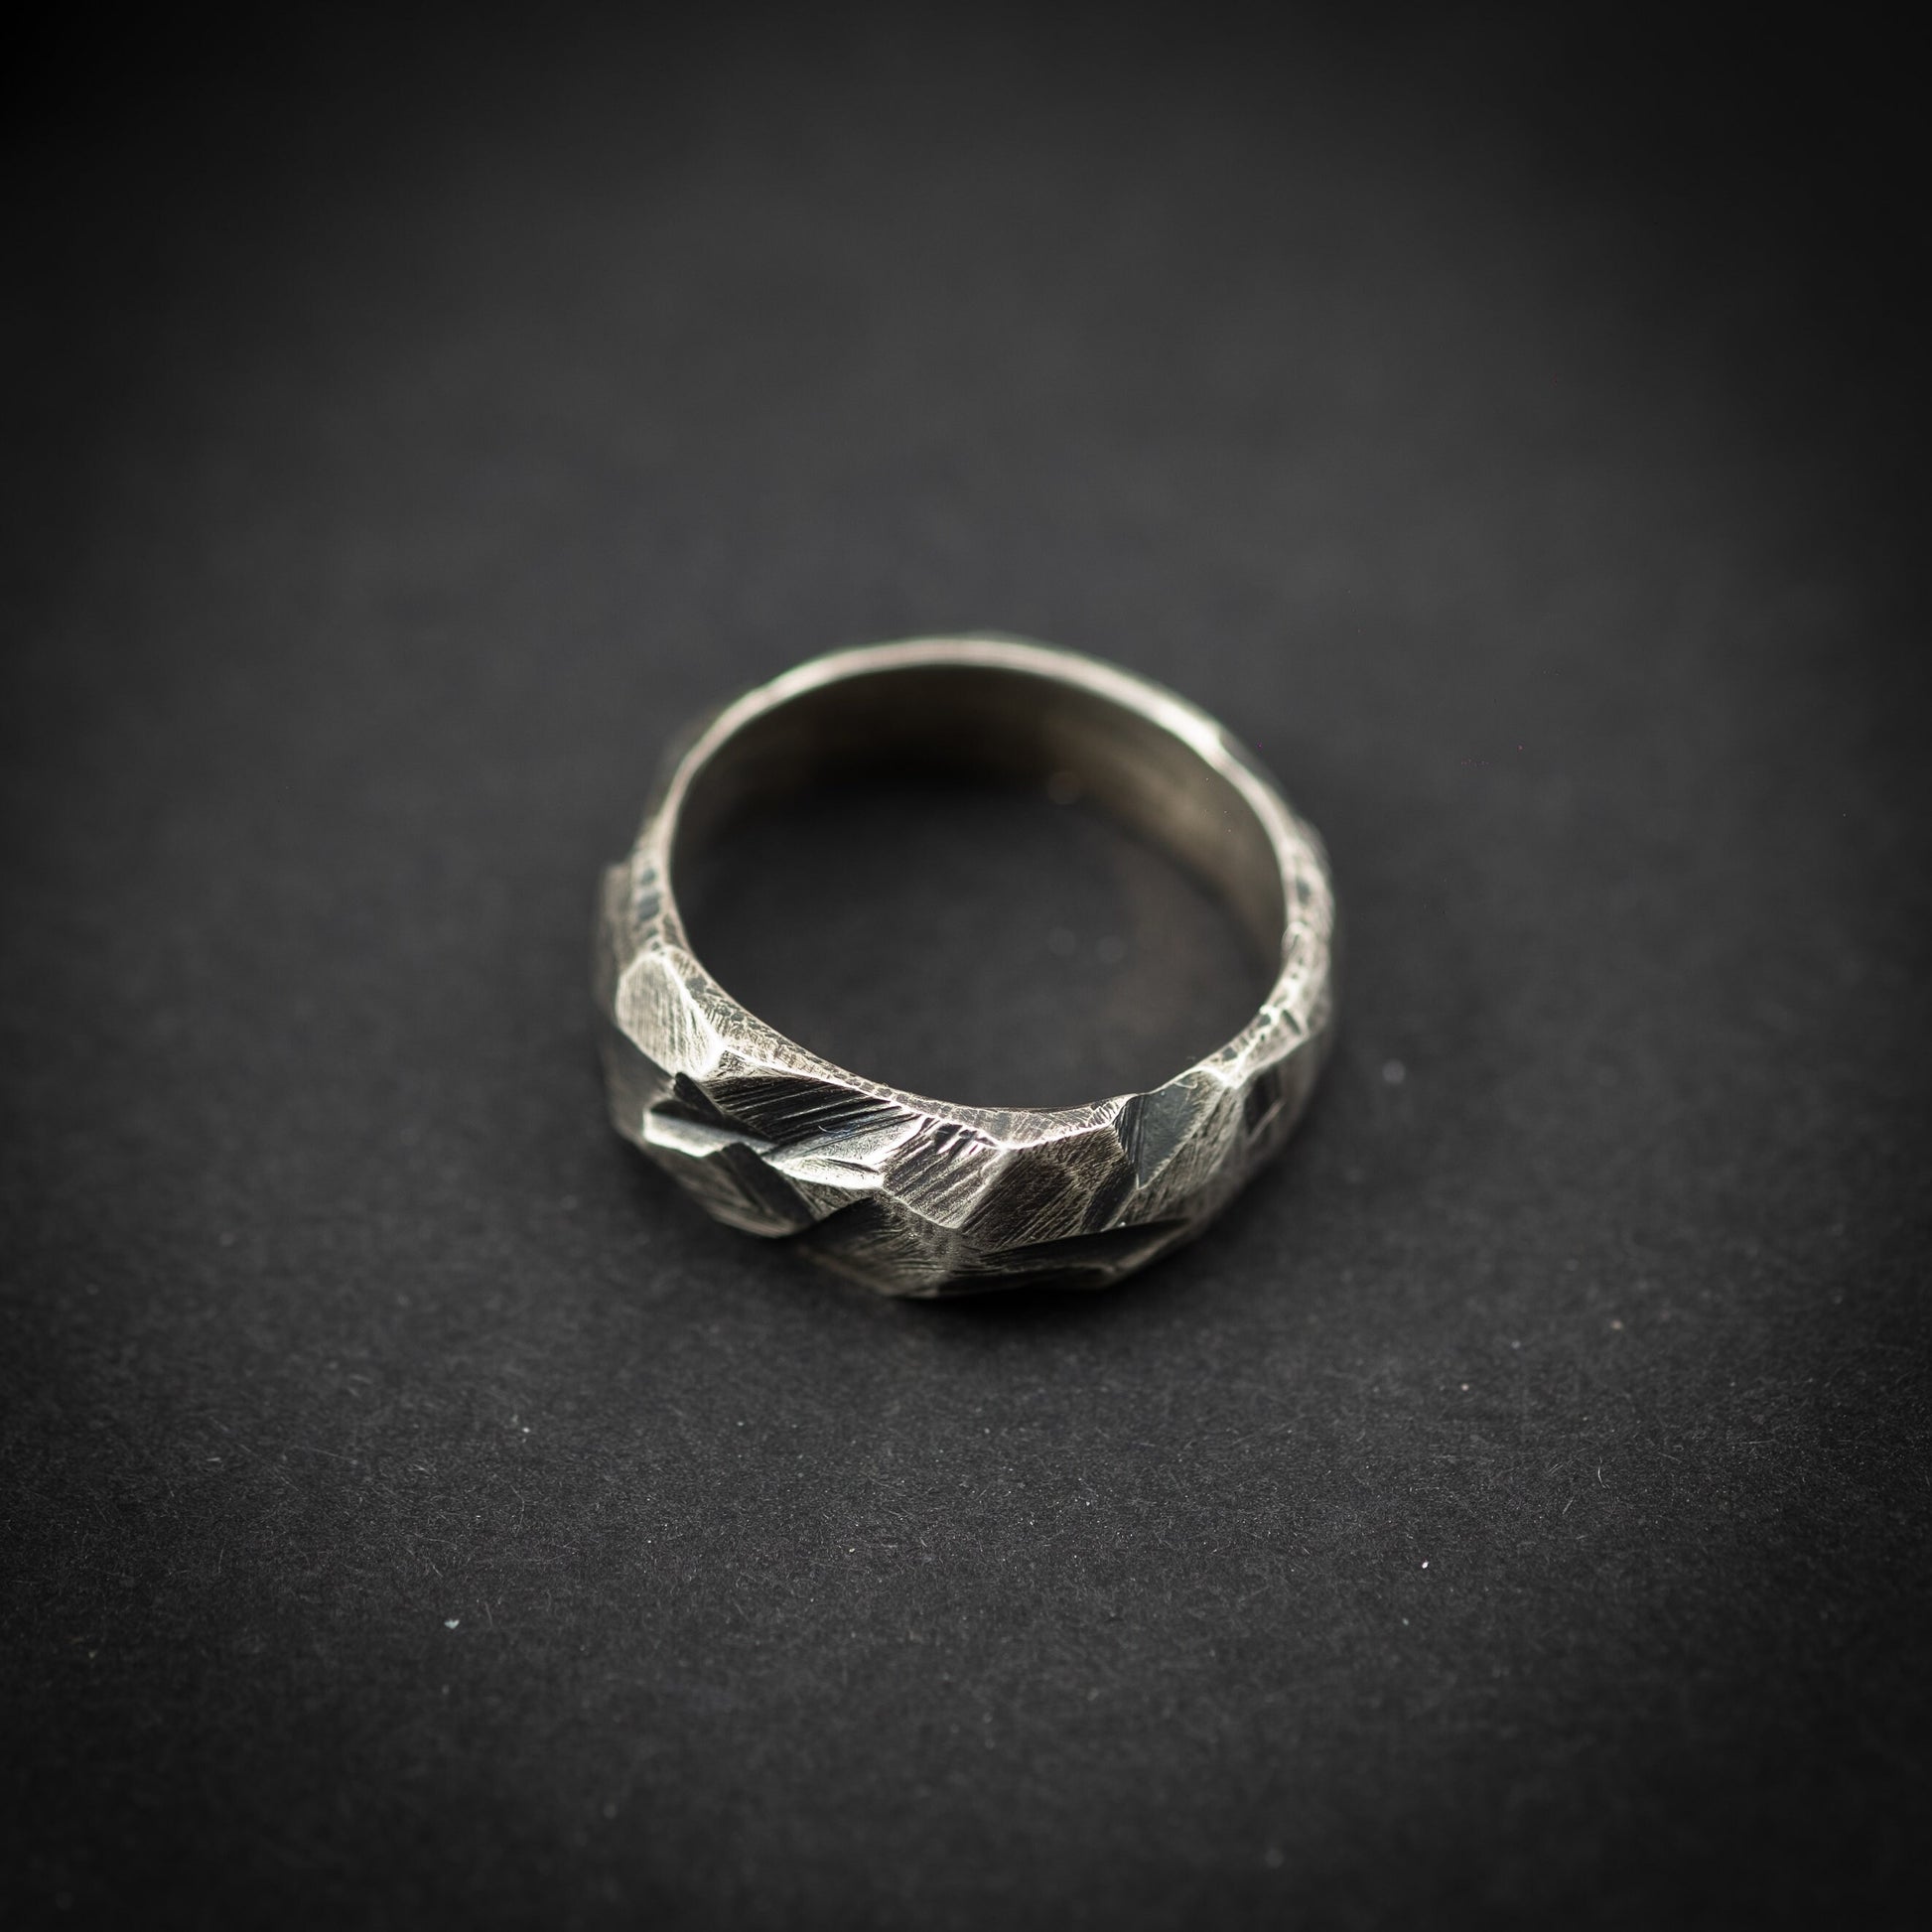 Rustic Silver mens ring, Unique gift for men, Raw brutalist ring, husband anniversary gift, handmade silver jewelry for men